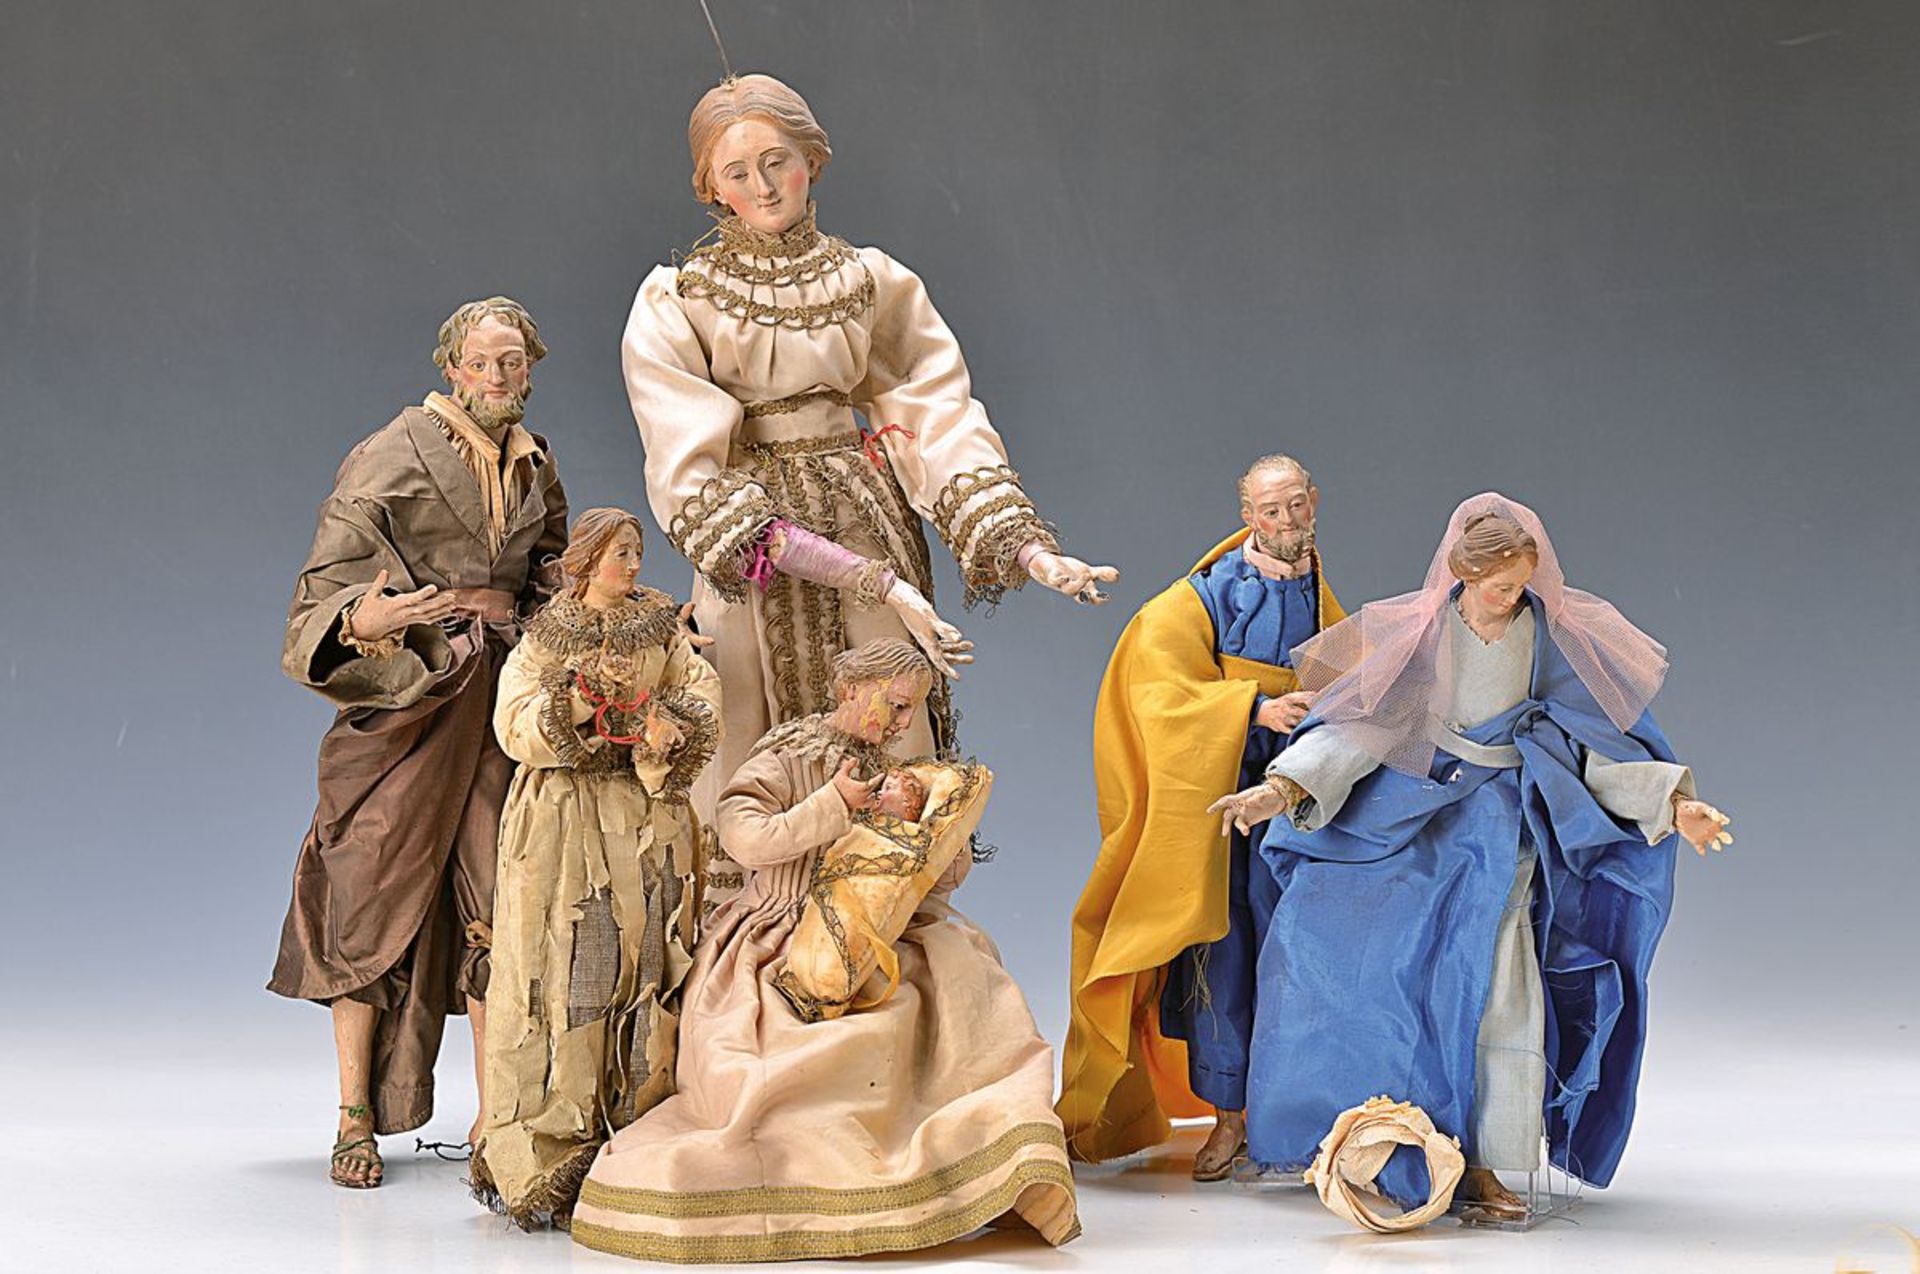 11 early crib figurines, probably Palatinate, around 1880-1900, ceramic, painted, body partly